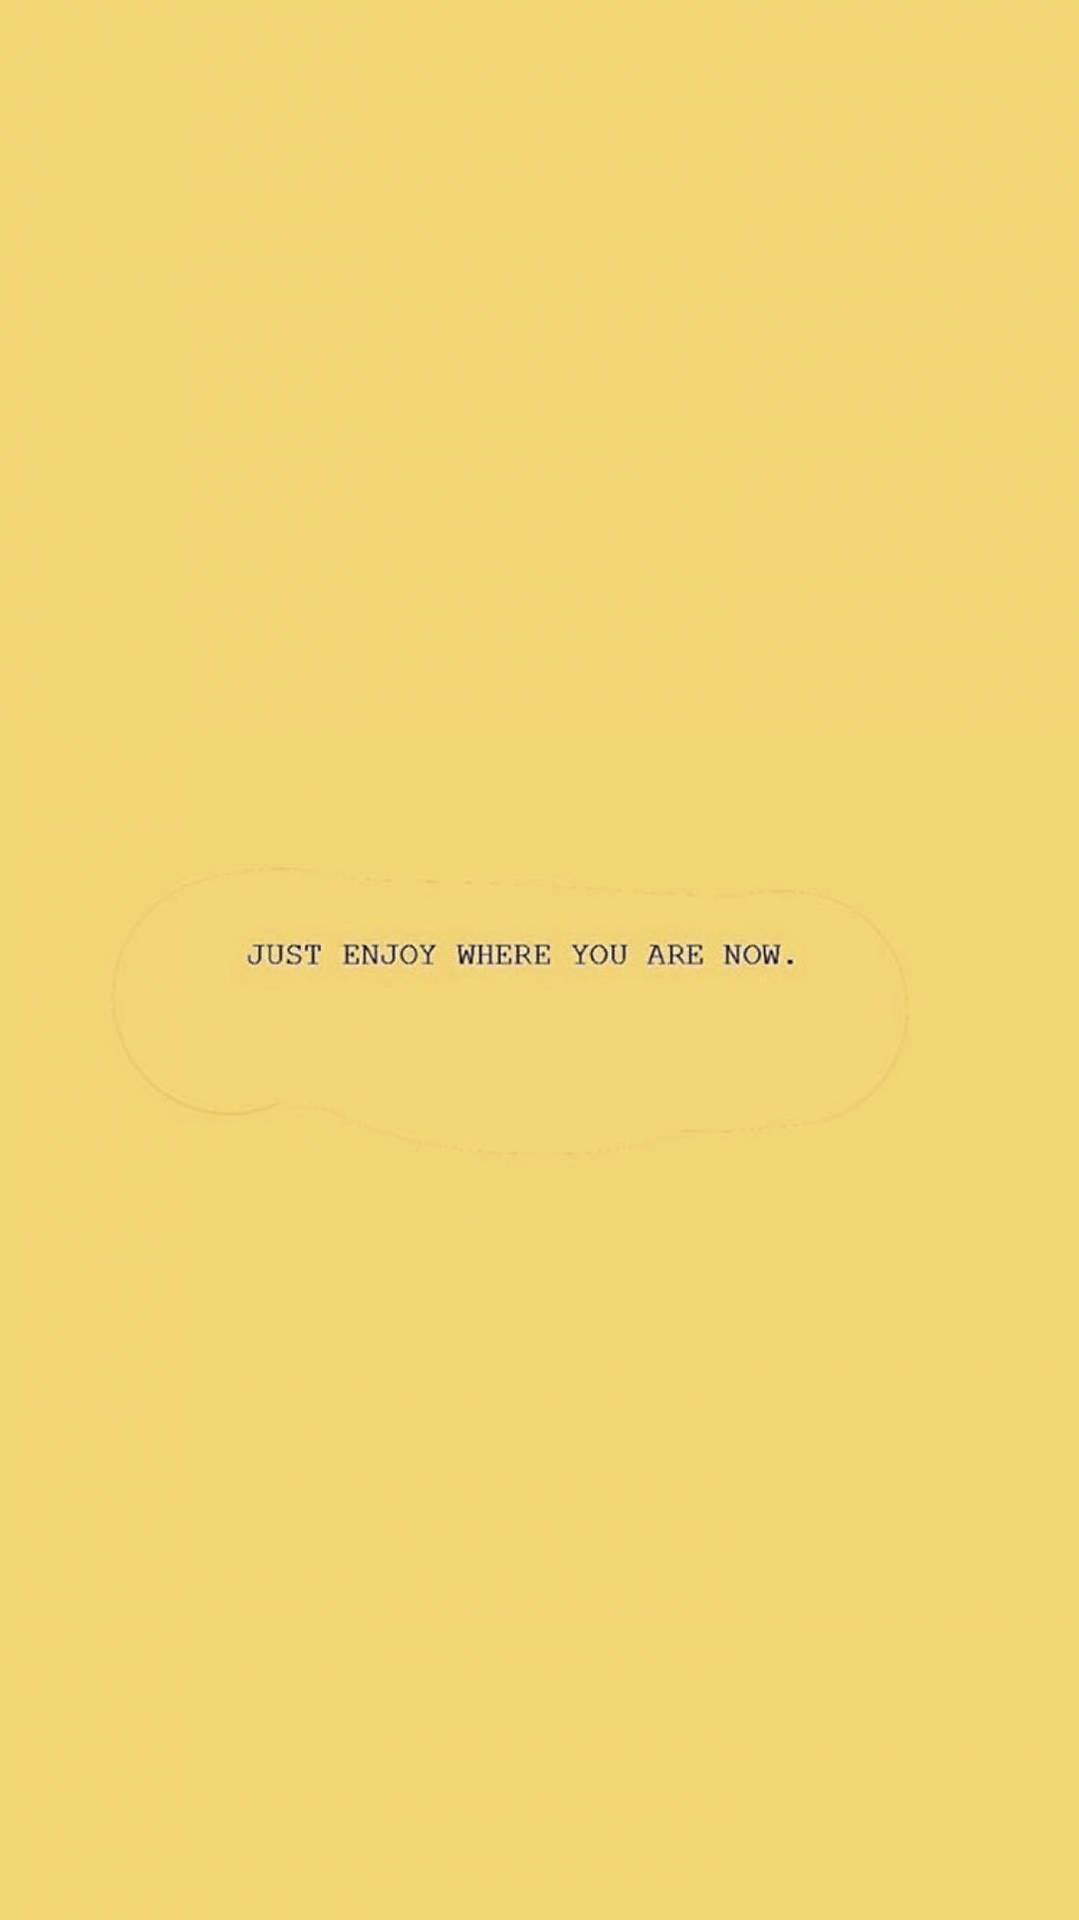 Download Sad Aesthetic Quote In Yellow Background Wallpaper